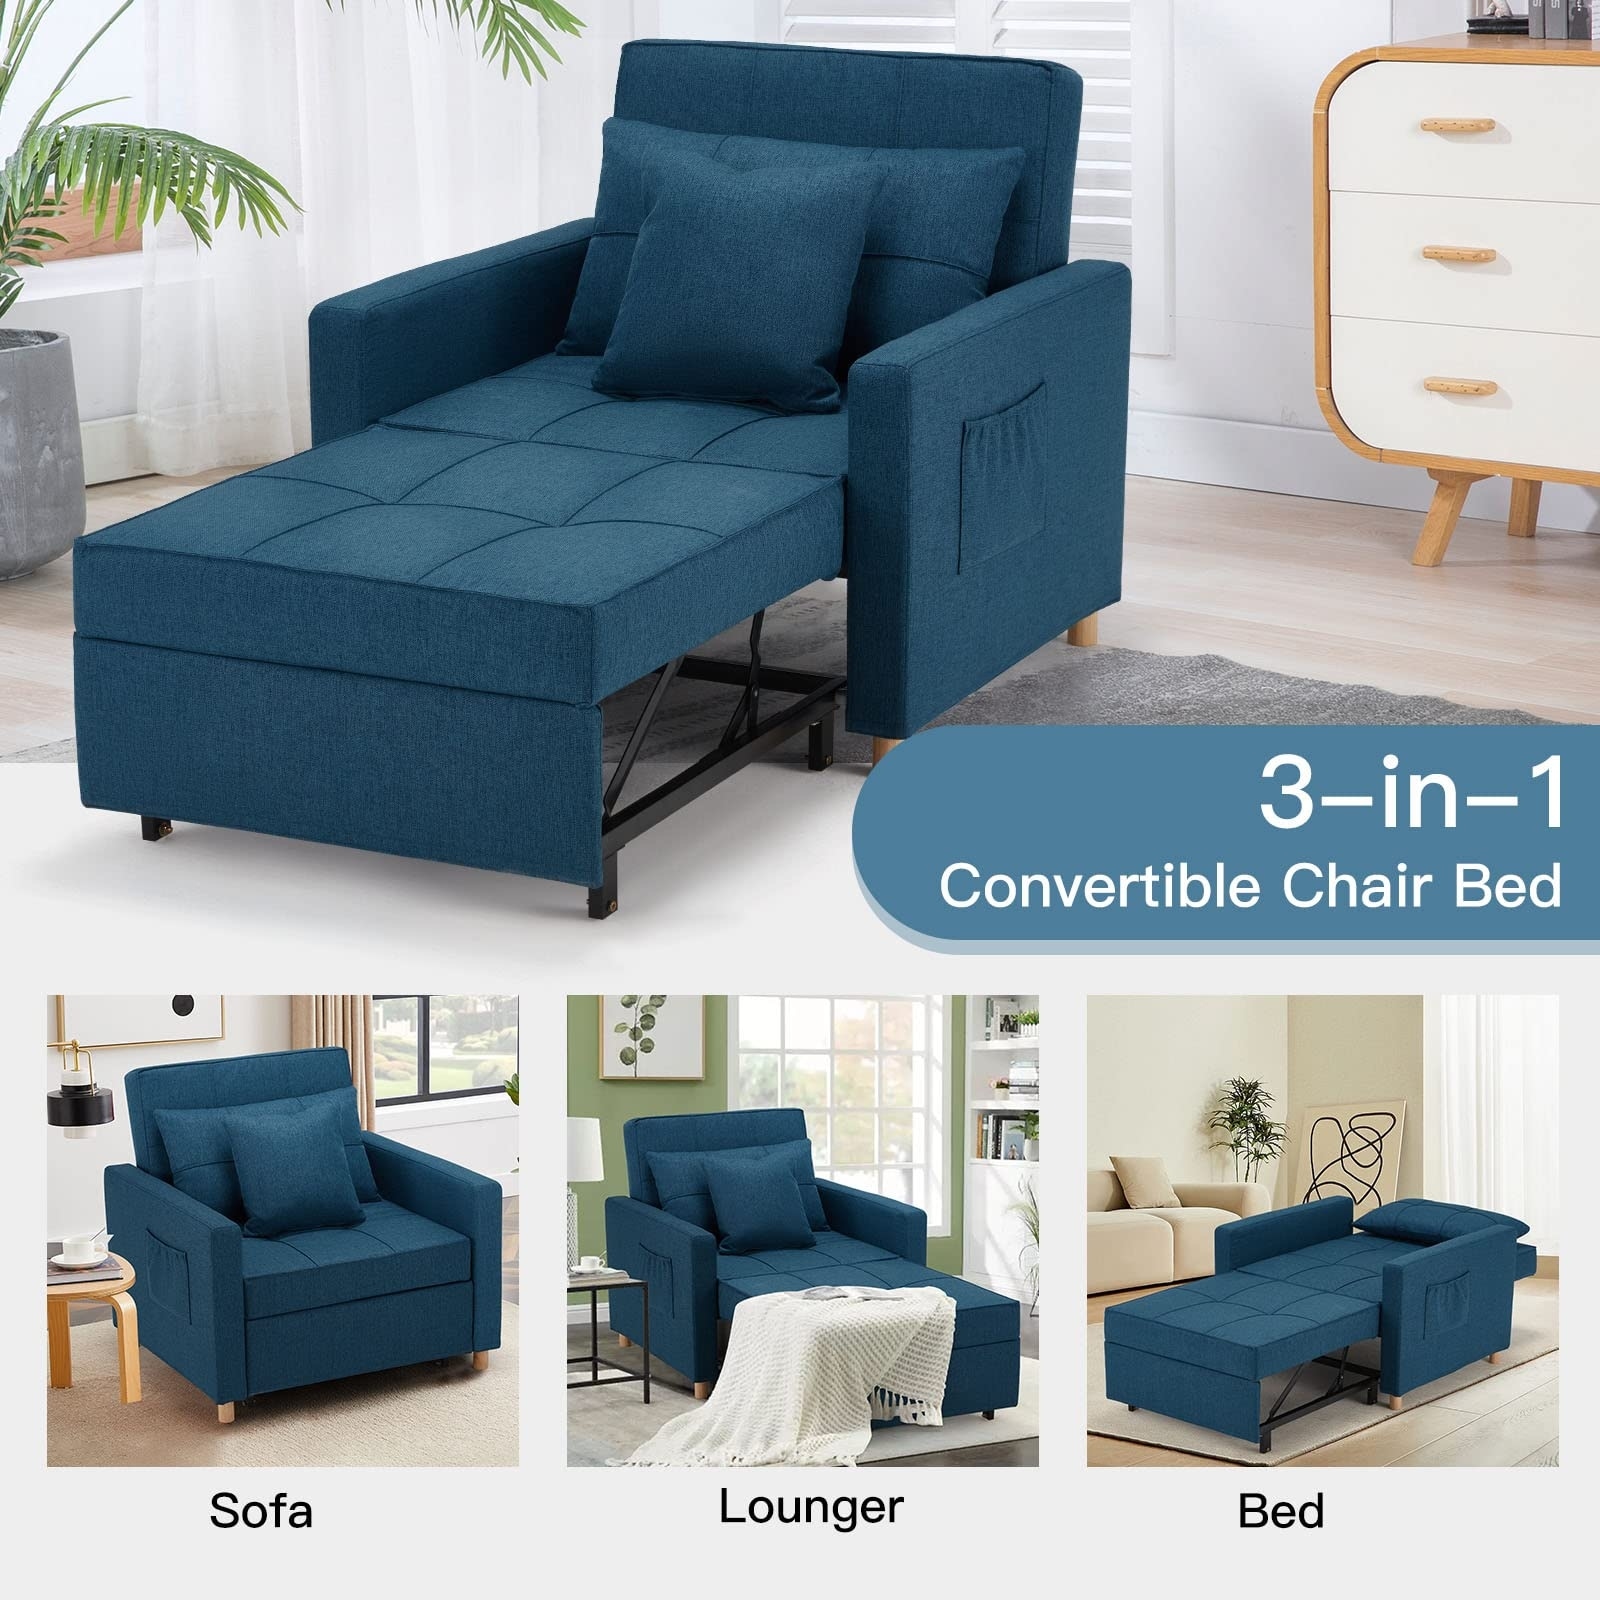 Convertible Chair Bed 3 in 1, Lofka Sleeper Sofa Bed with